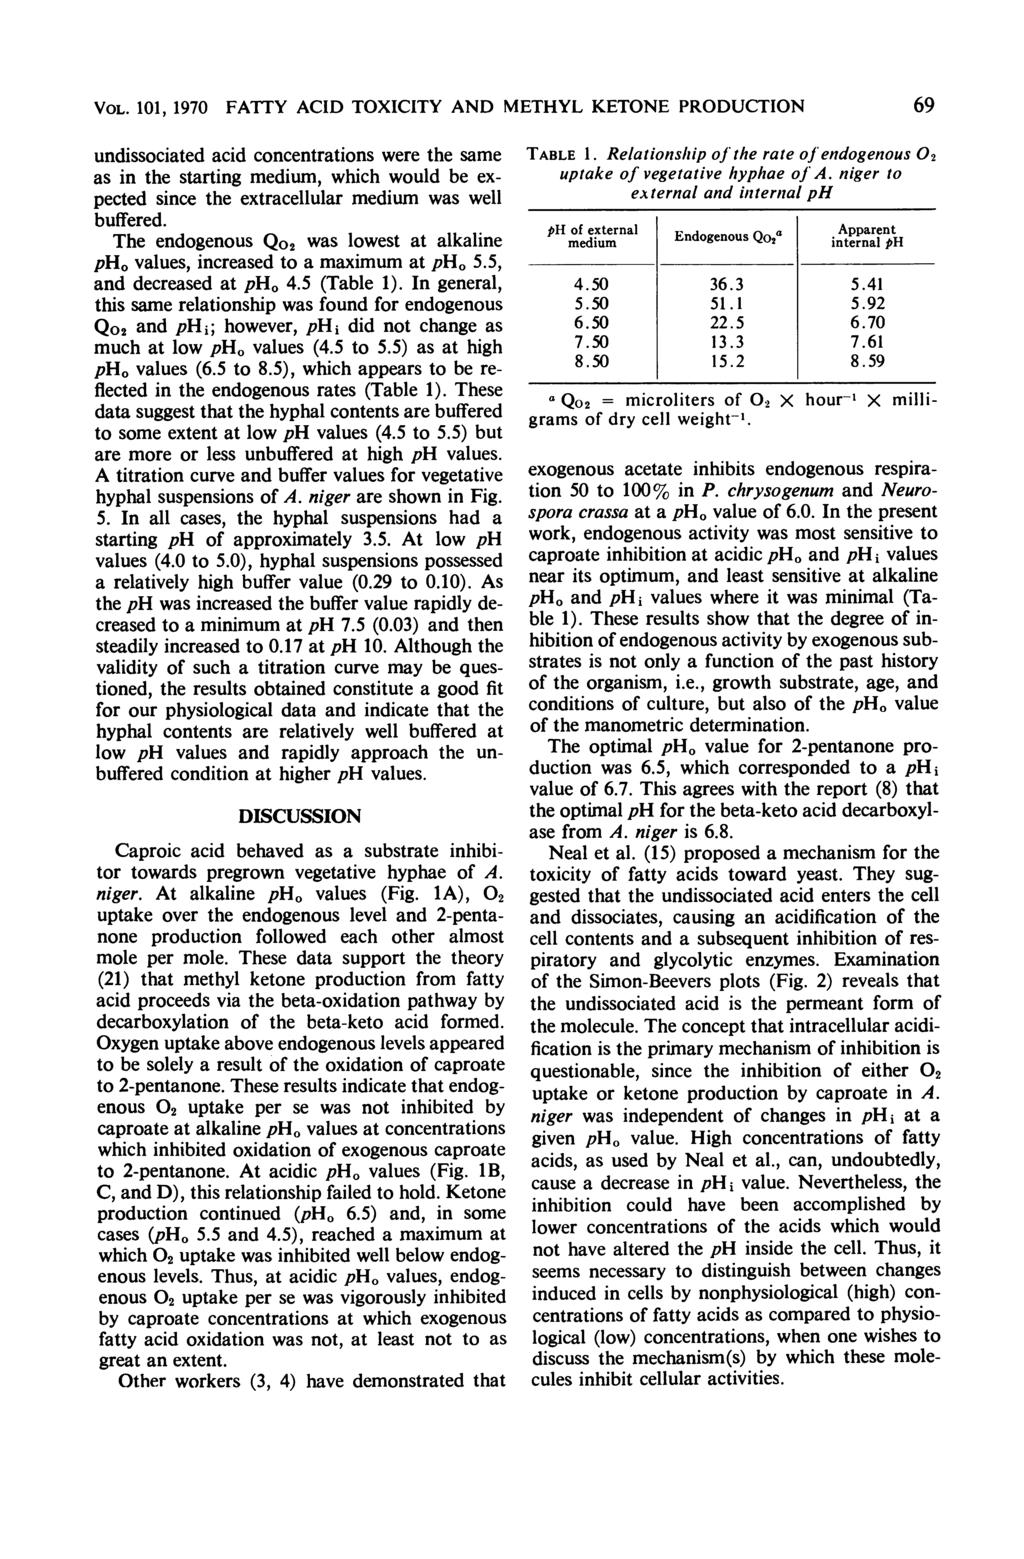 VOL. 11, 197 FATTY ACID TOXICITY AND METHYL KETONE PRODUCTION 69 undissociated acid concentrations were the same as in the starting medium, which would be expected since the extracellular medium was